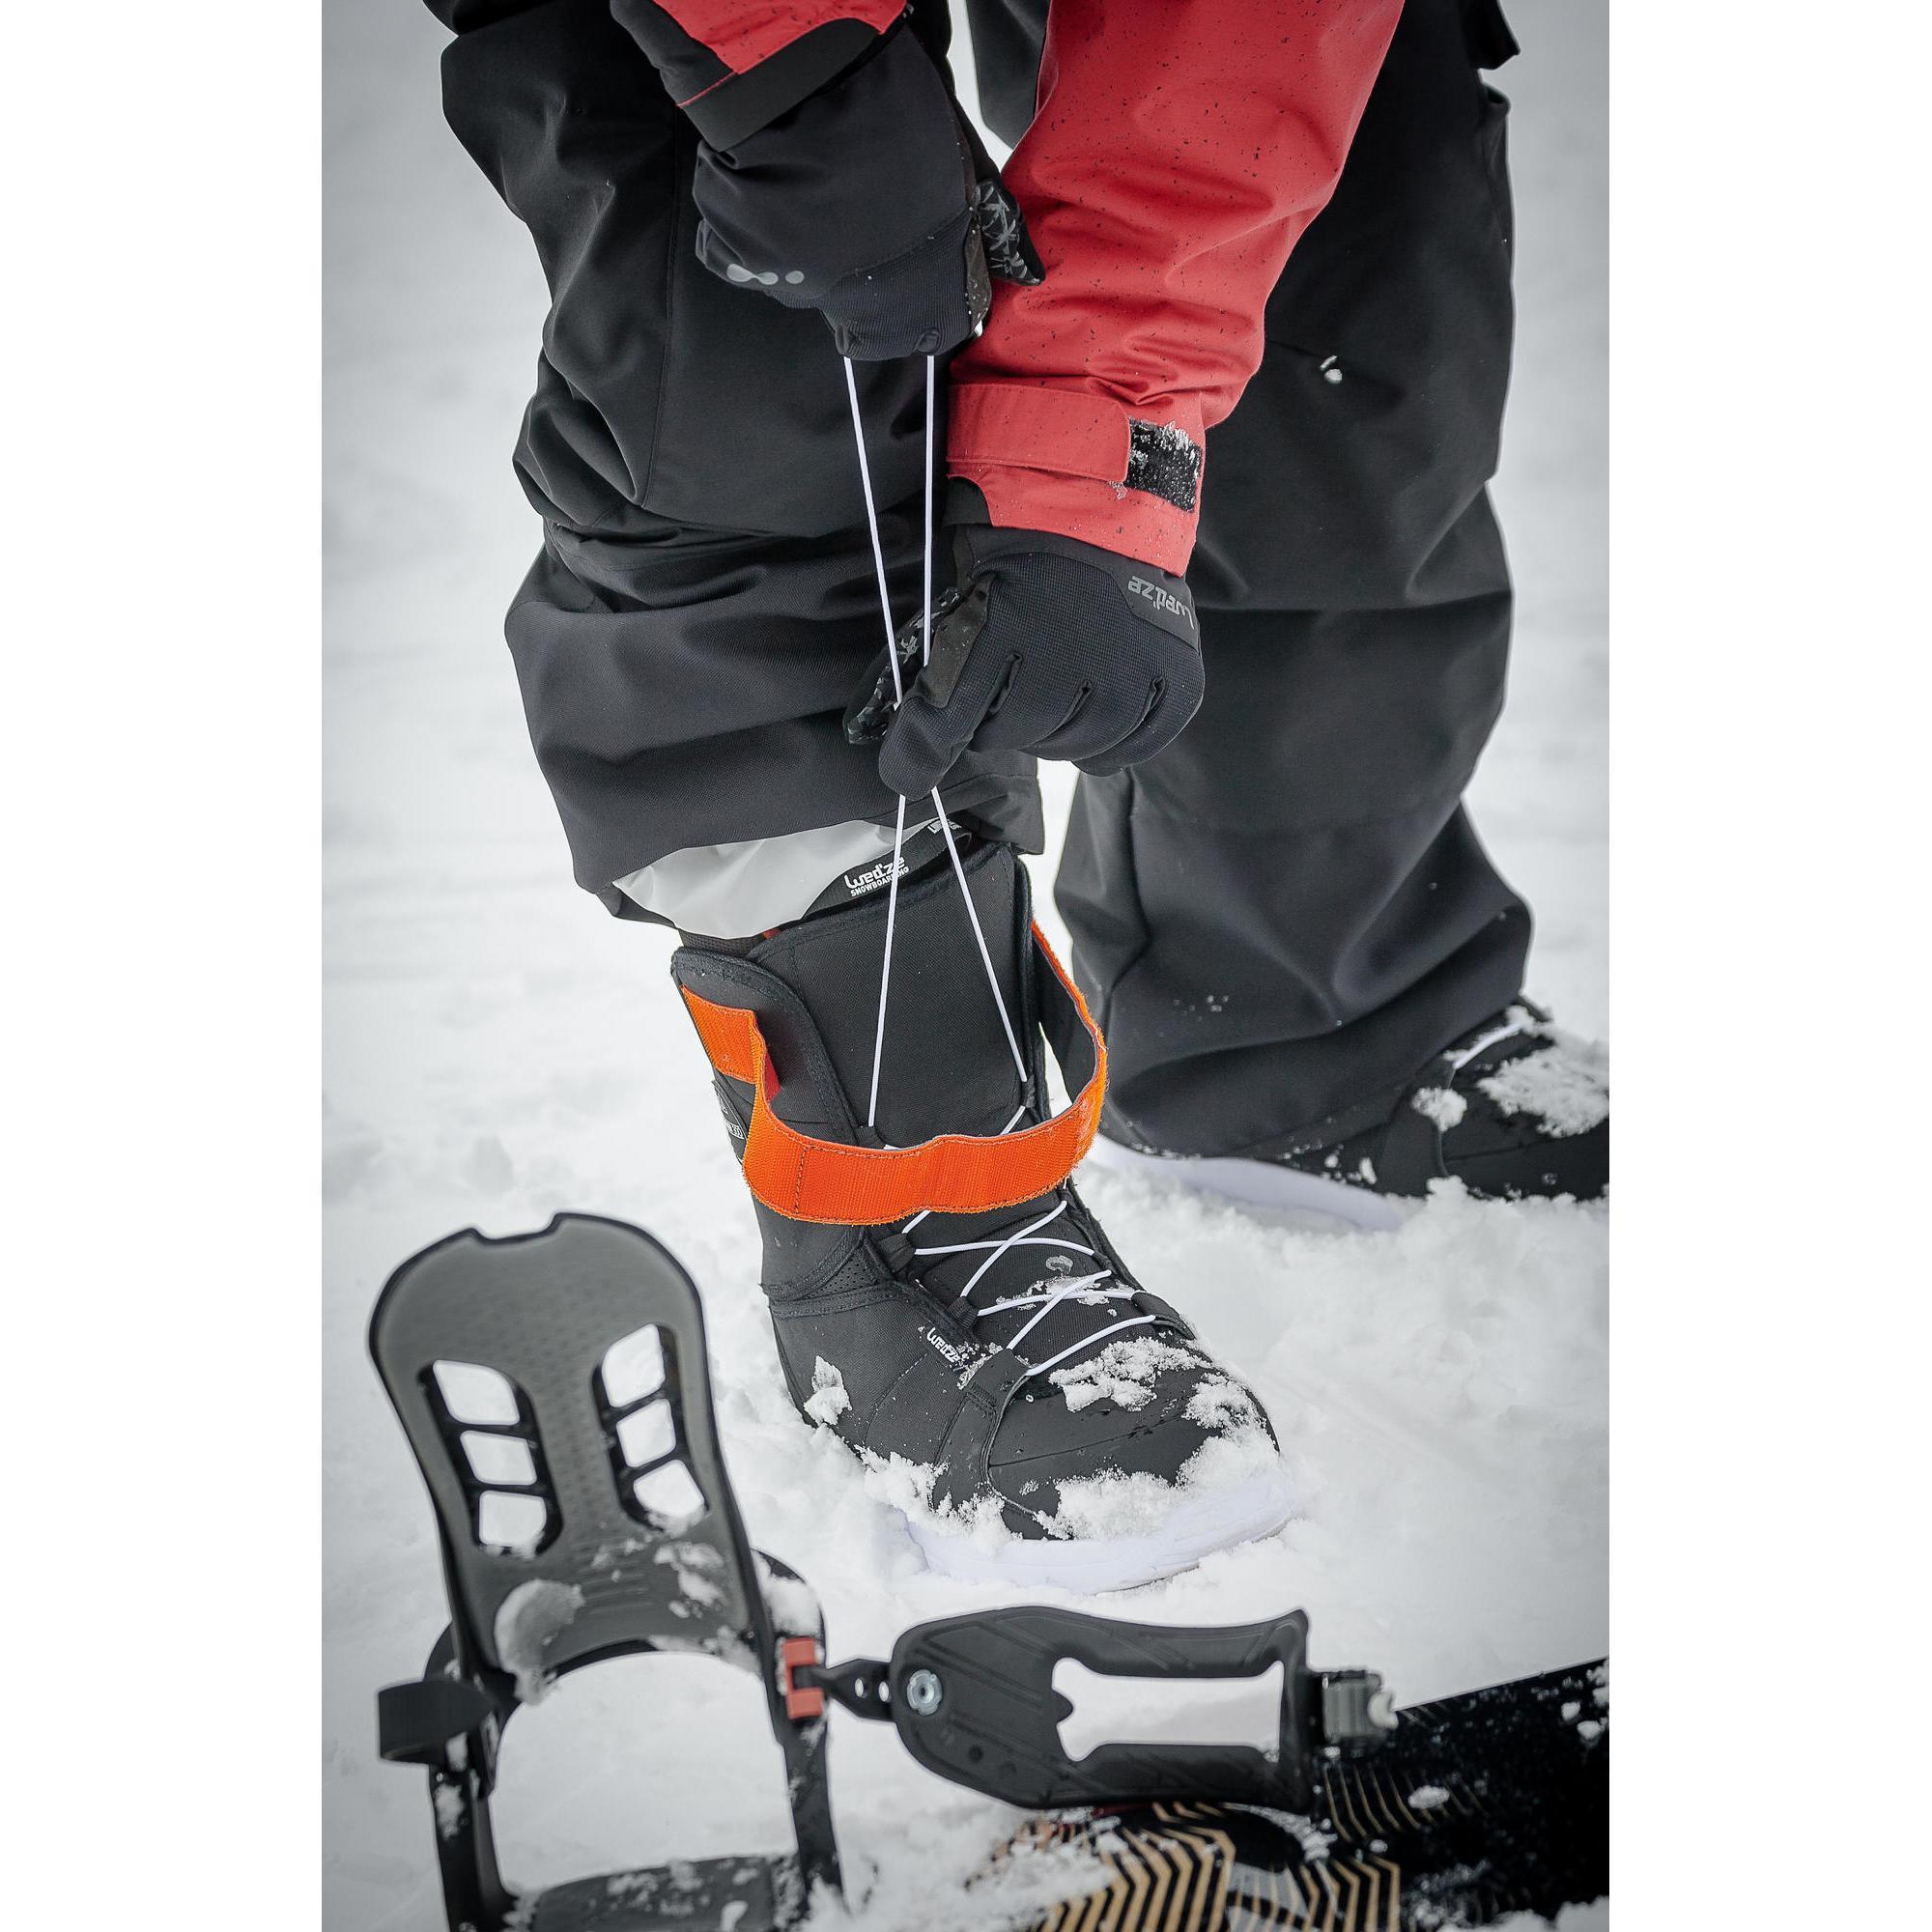 snowshoes that fit snowboard boots